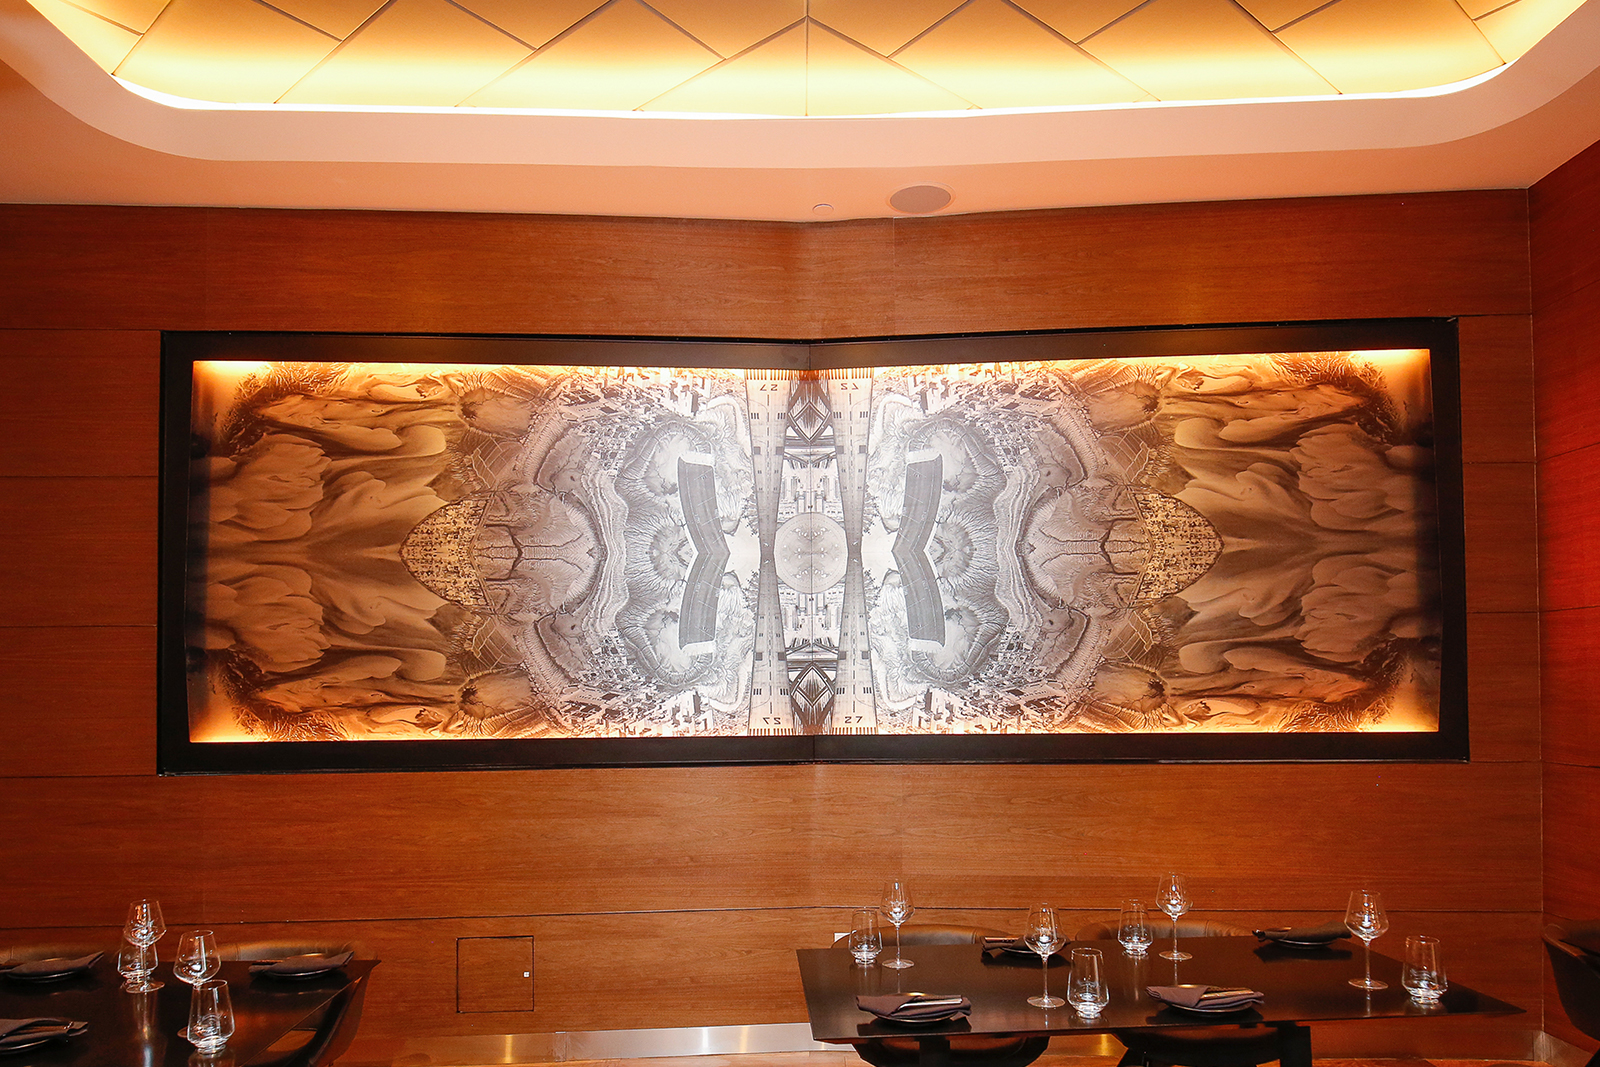 Lightbox mural of an abstracted and mirrored aerial topographical view displayed on a gently angled wood paneled wall behind set tables in the restaurant.